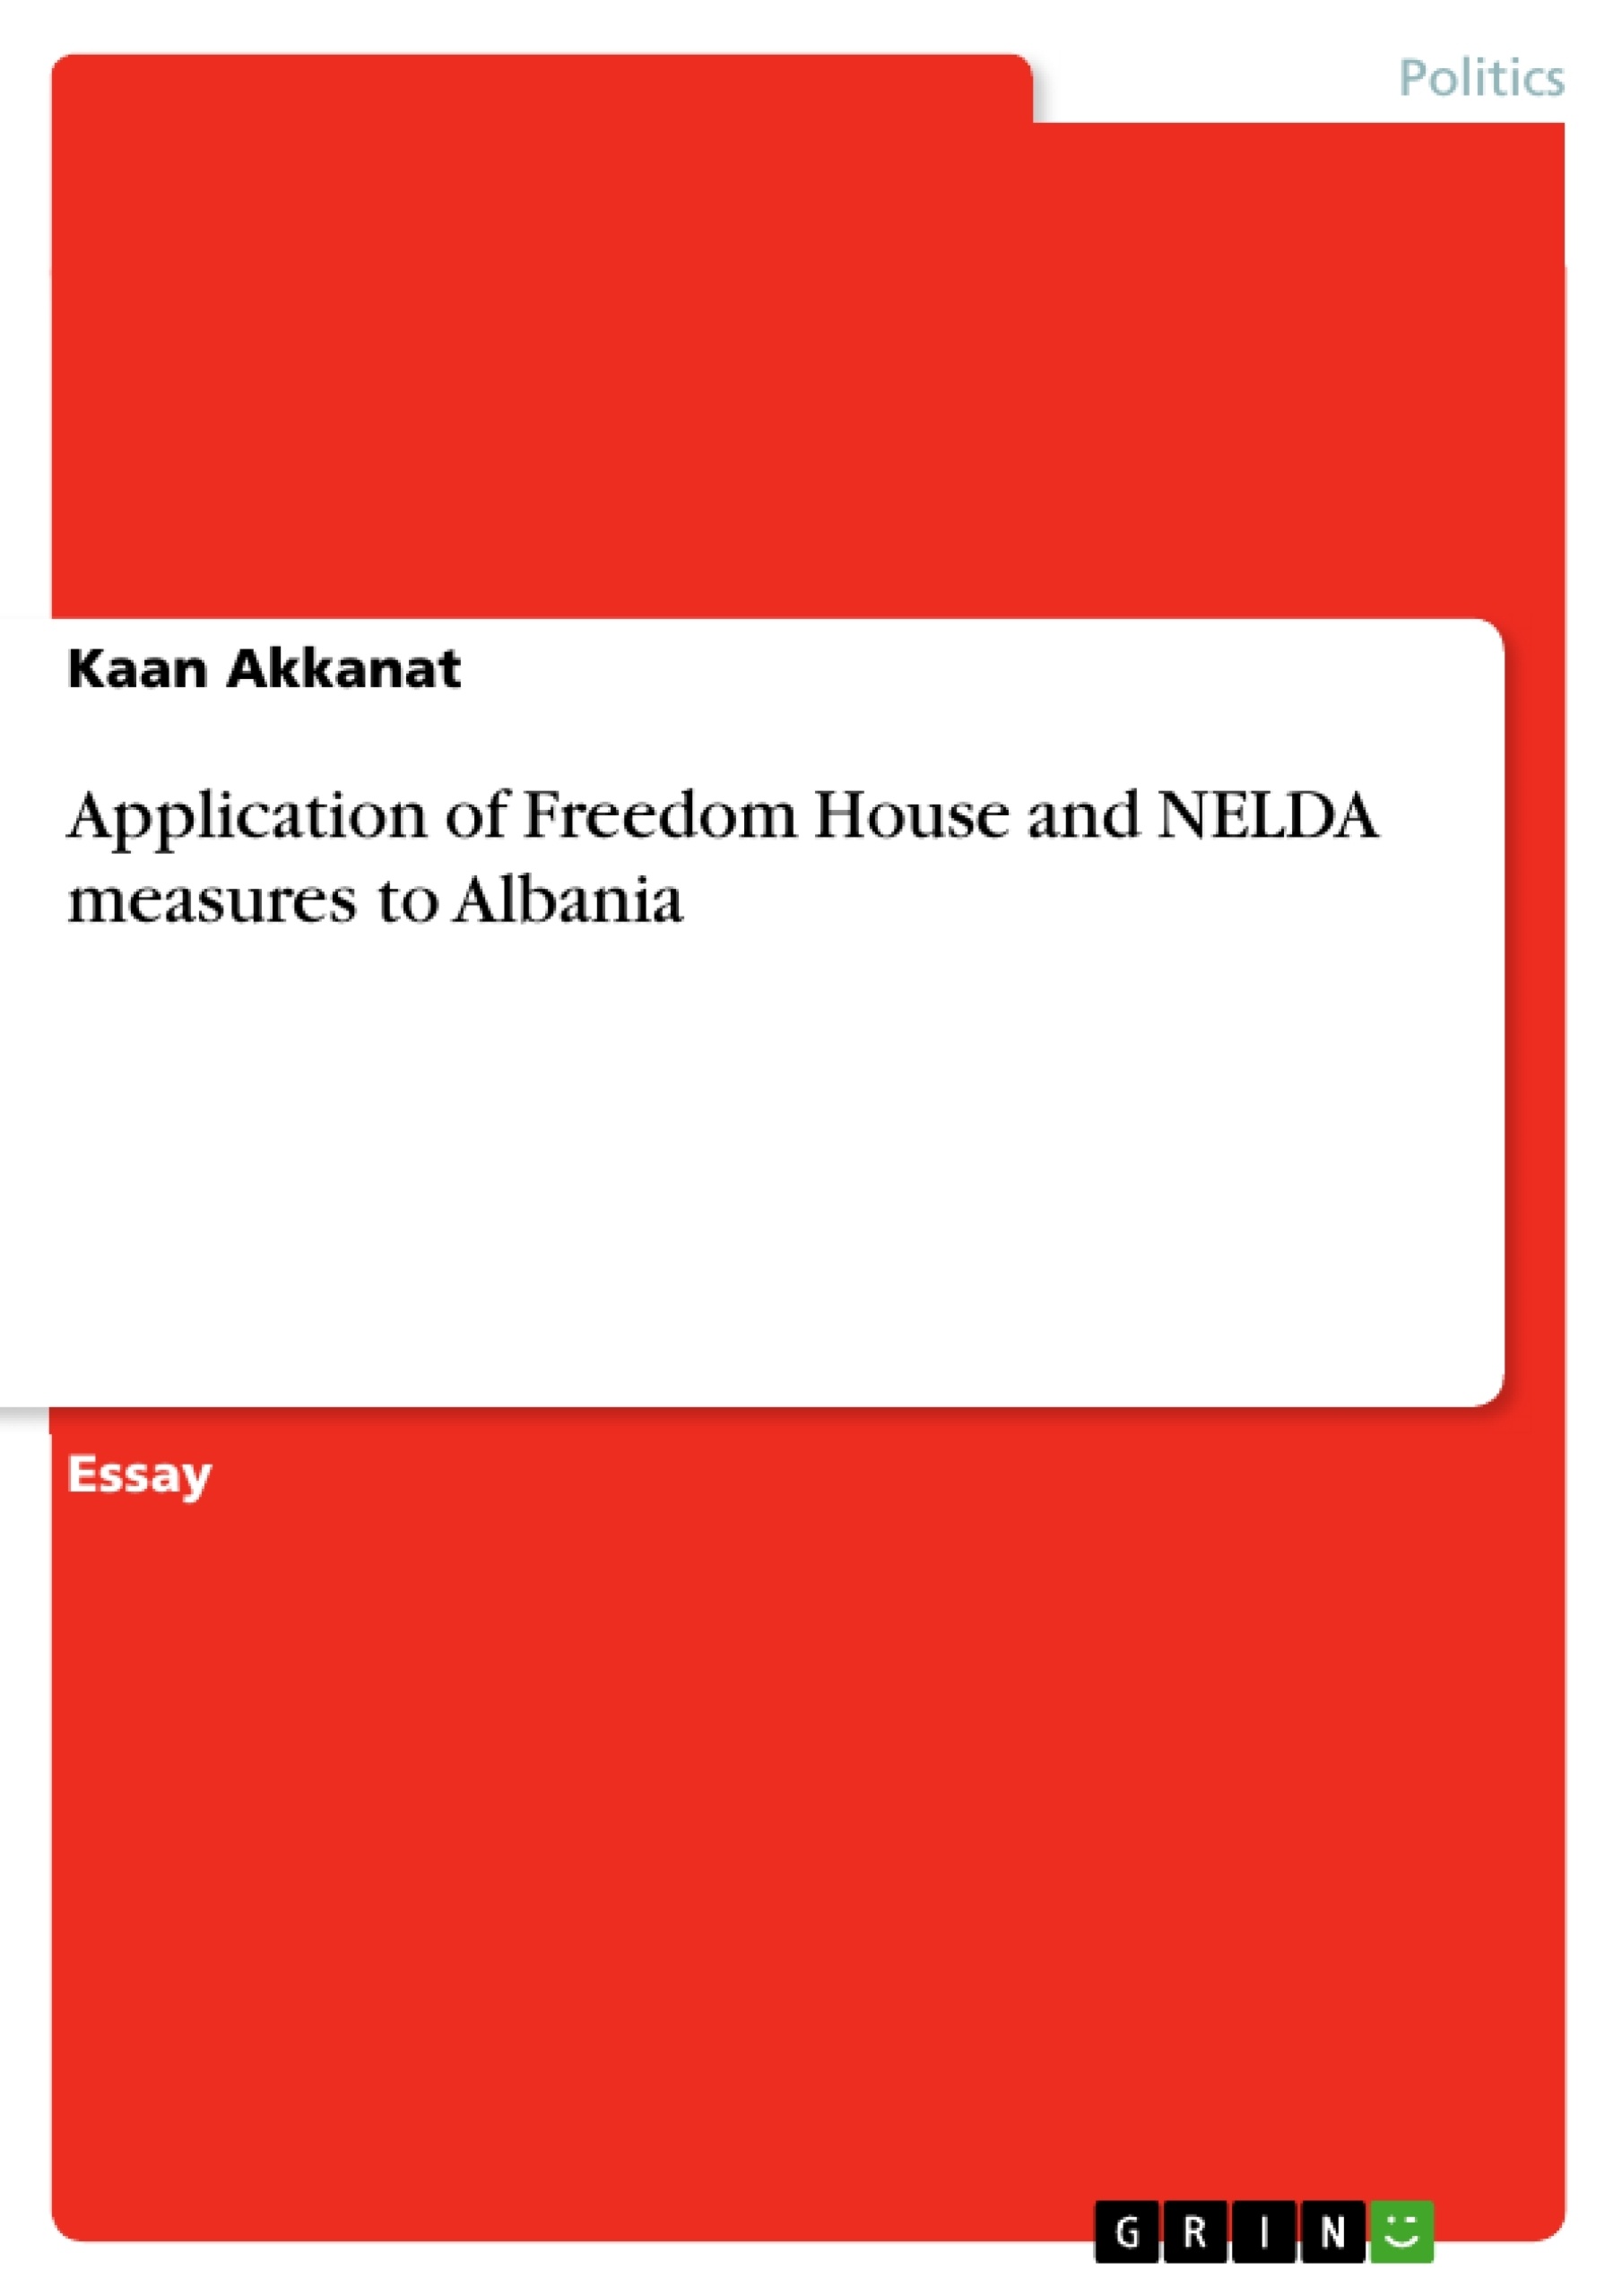 Title: Application of Freedom House and NELDA measures to Albania